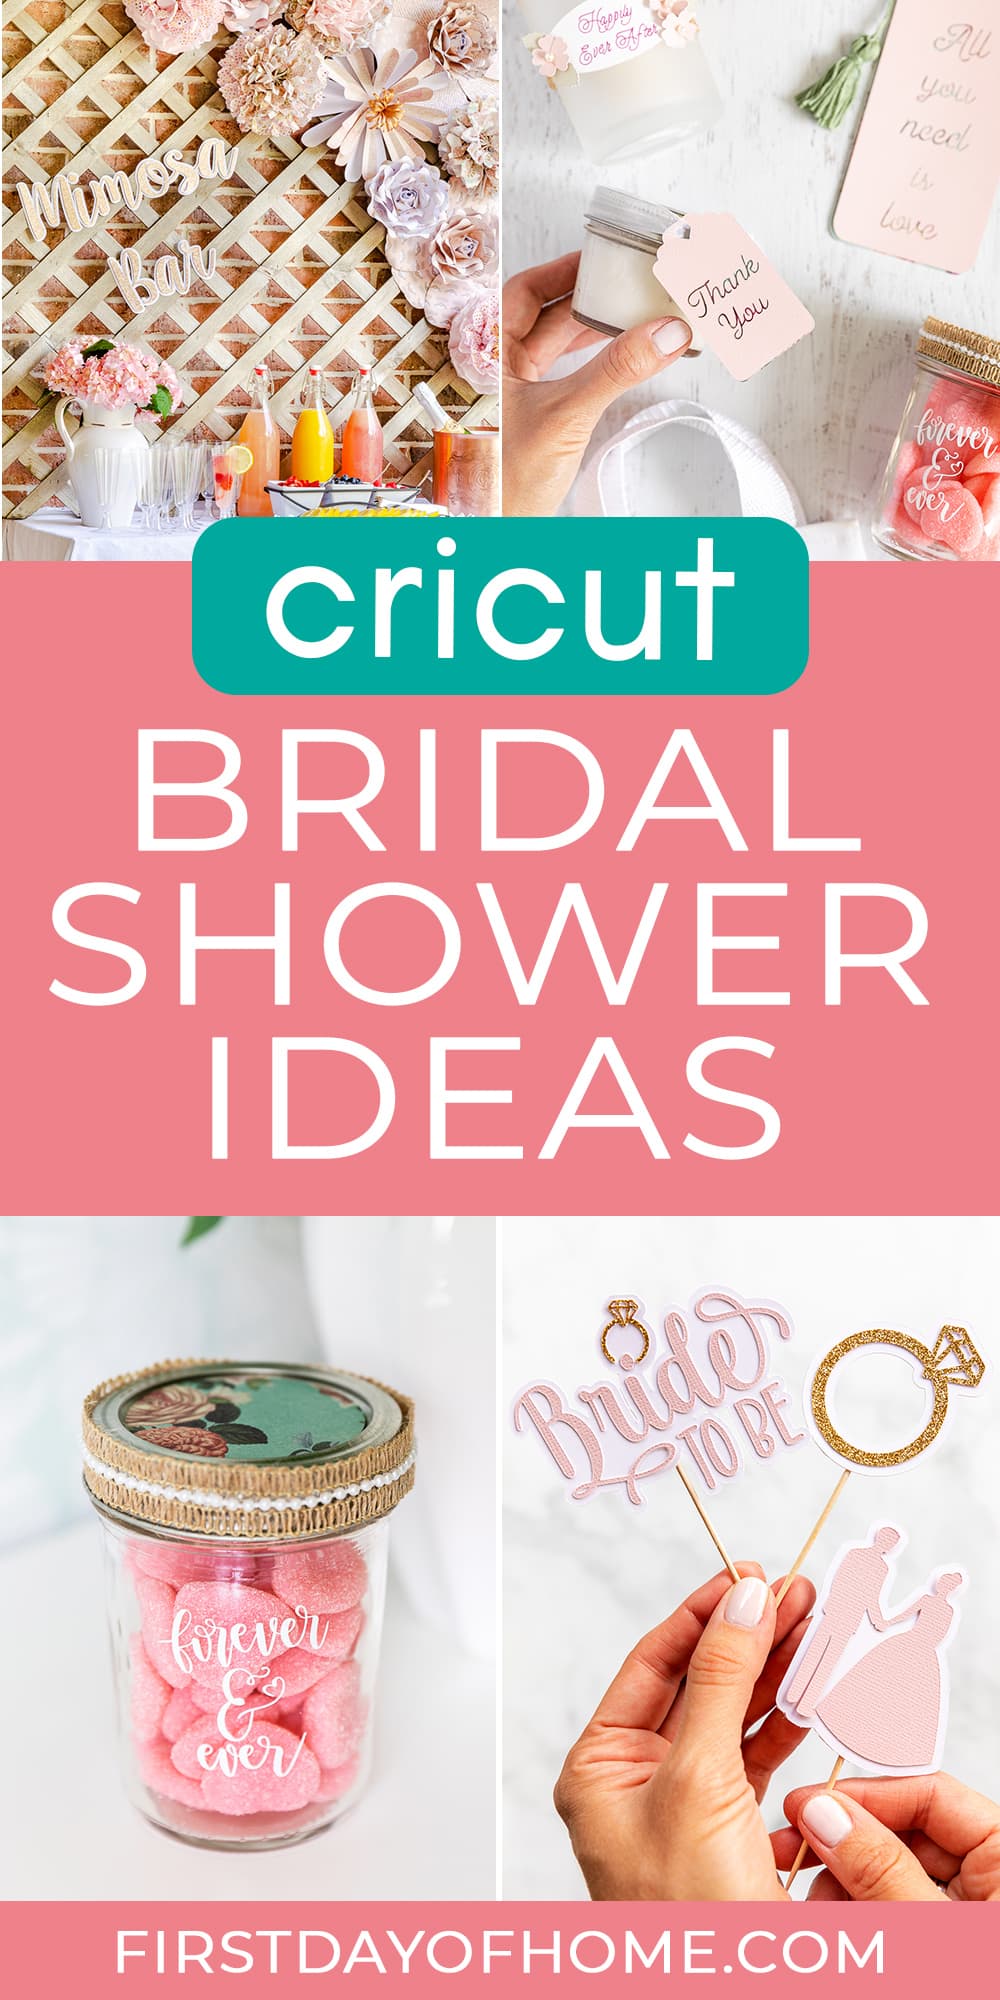 Collage of bridal shower ideas made using Cricut. Text overlay reads "Cricut Bridal Shower Ideas."